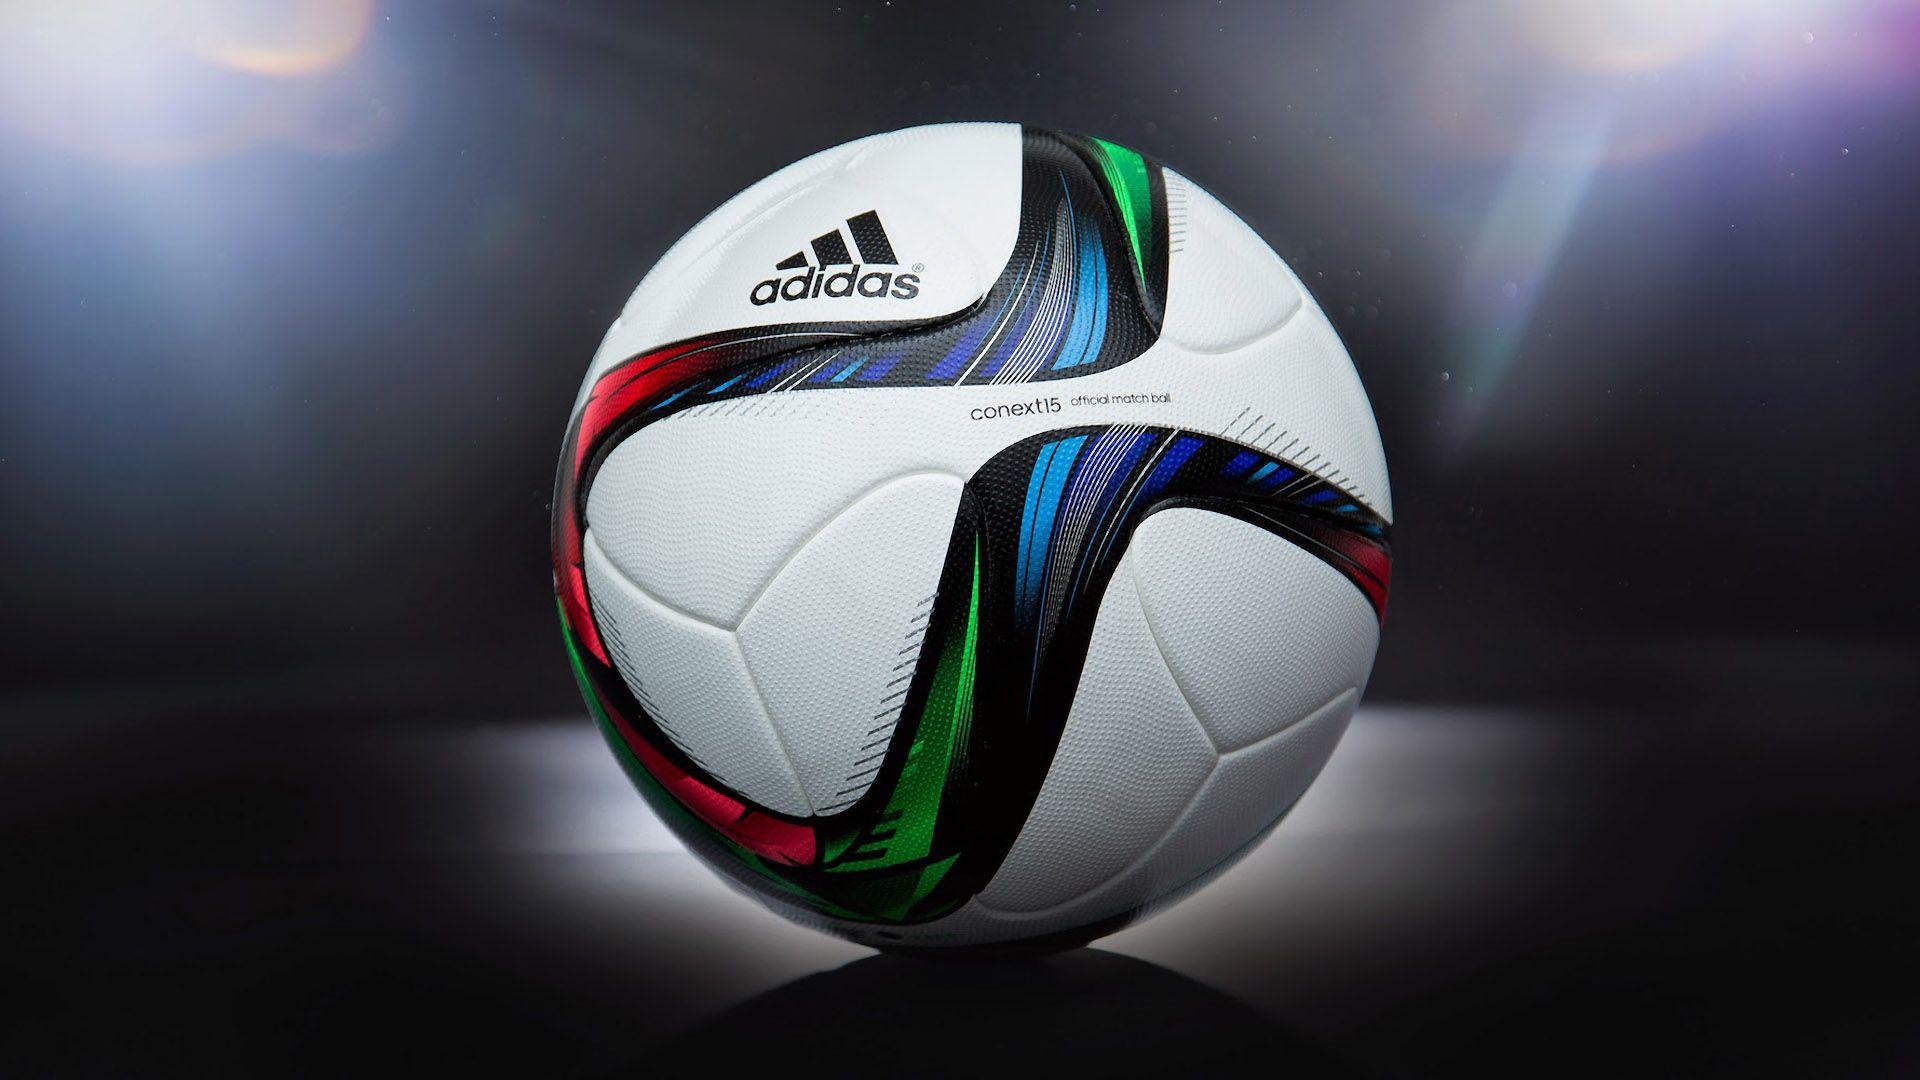 Nike Soccer Wallpaper 39 Nike Soccer 2015 Android Compatible